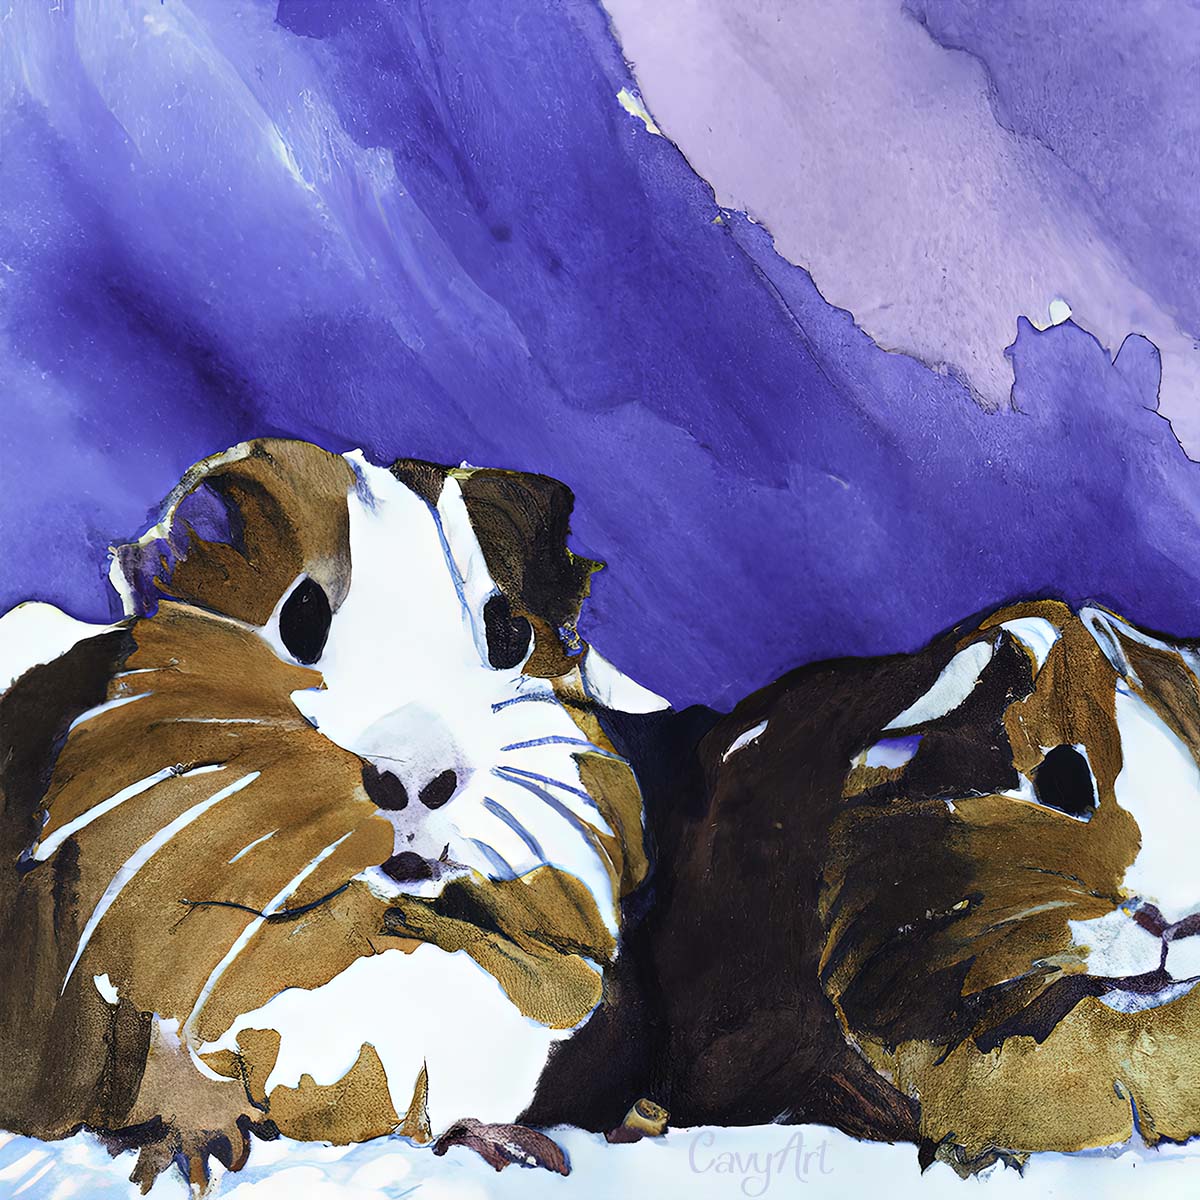 Two Guinea pig profiles illustration from CavyArt